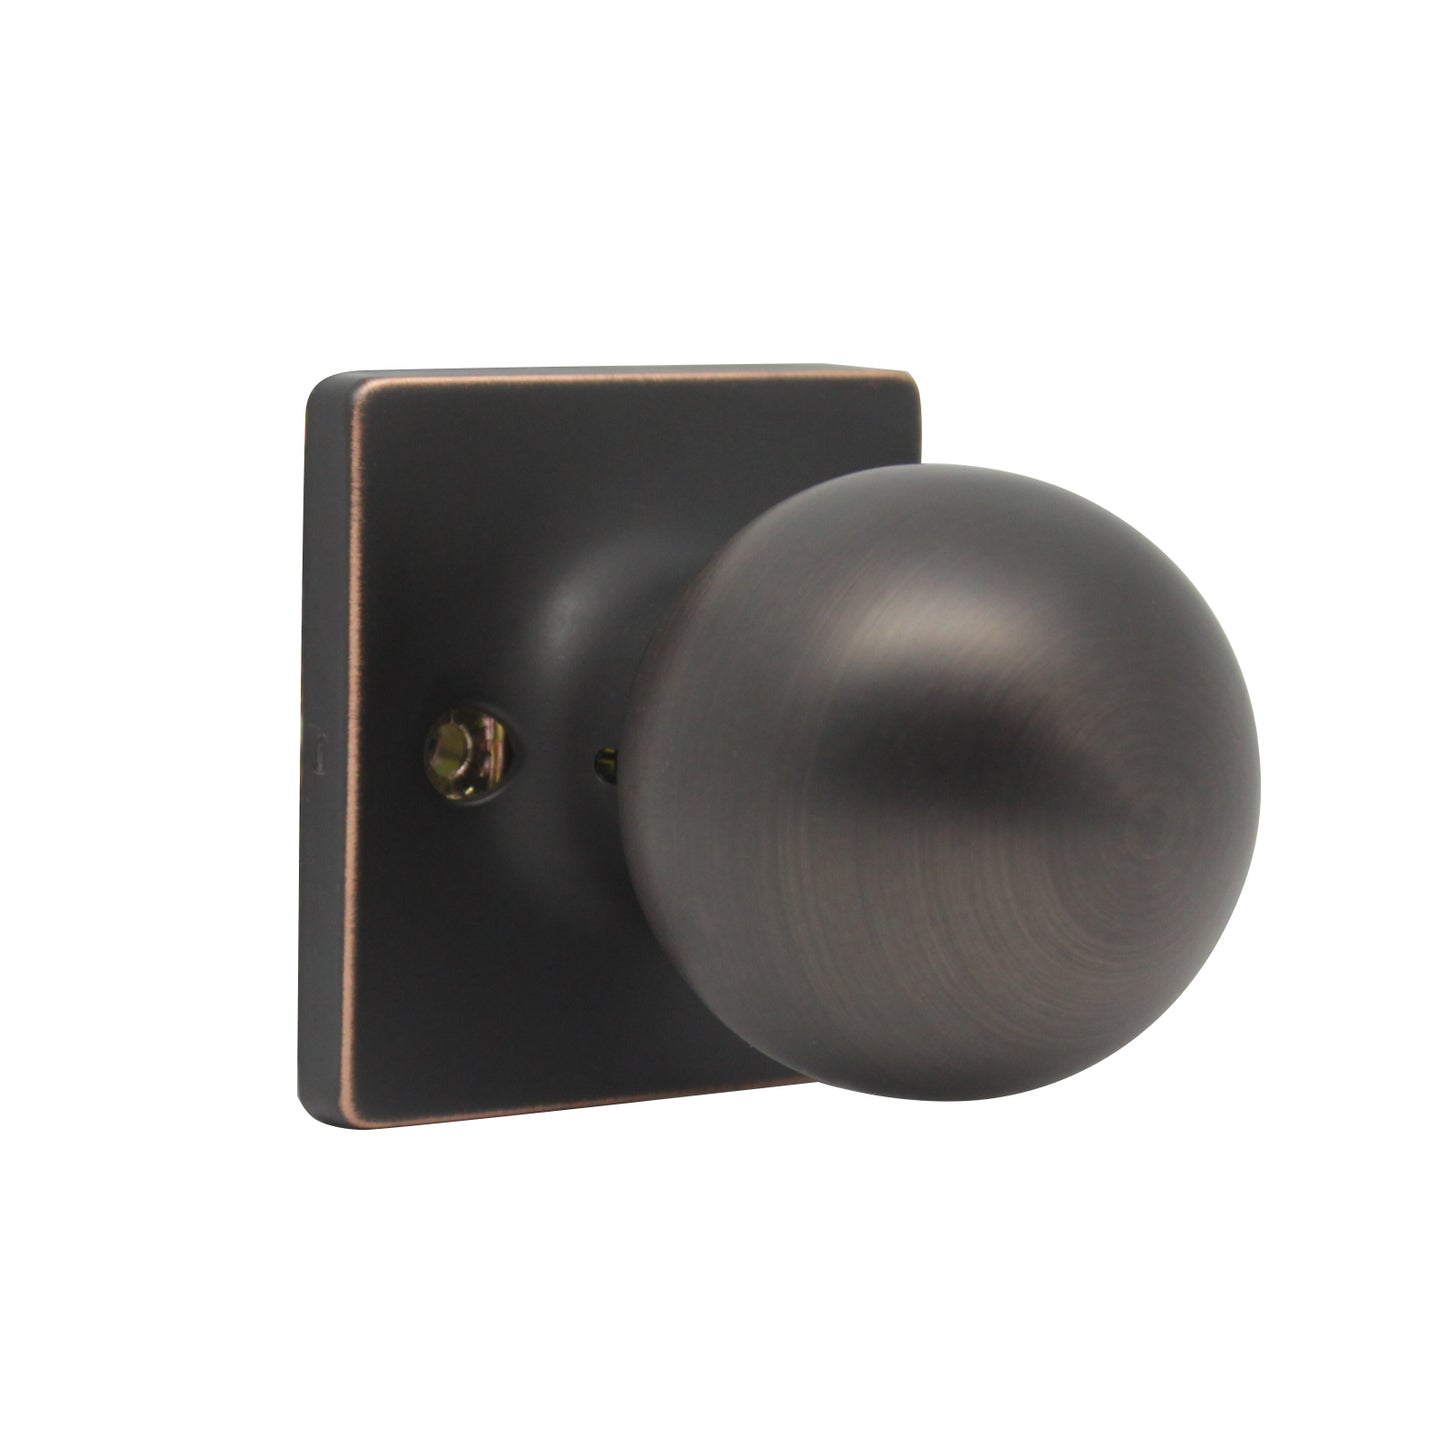 Round Ball Knob with Square Rosette, Interior Passage Door Knobs Oil Rubbed Bronze DLS07ORBPS - Probrico